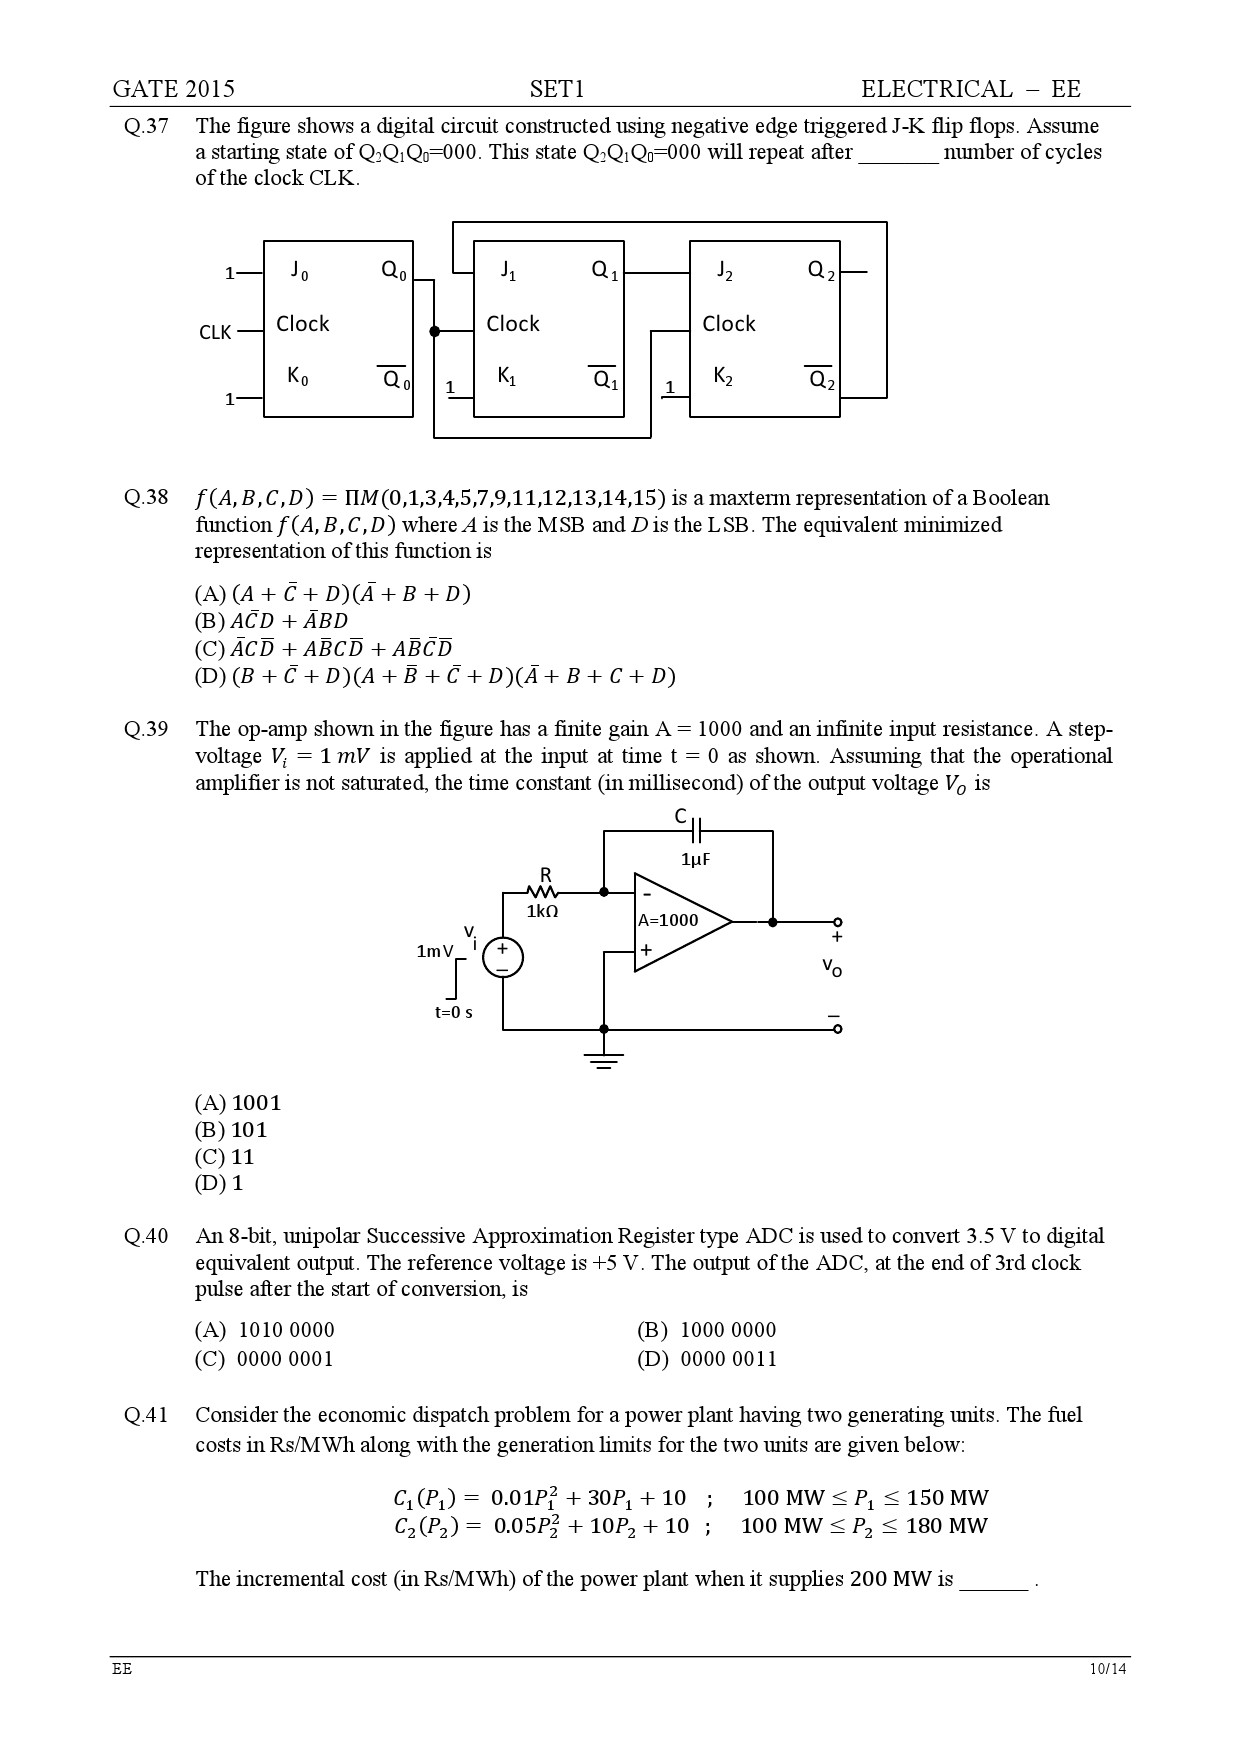 GATE Exam Question Paper 2015 Electrical Engineering Set 1 10